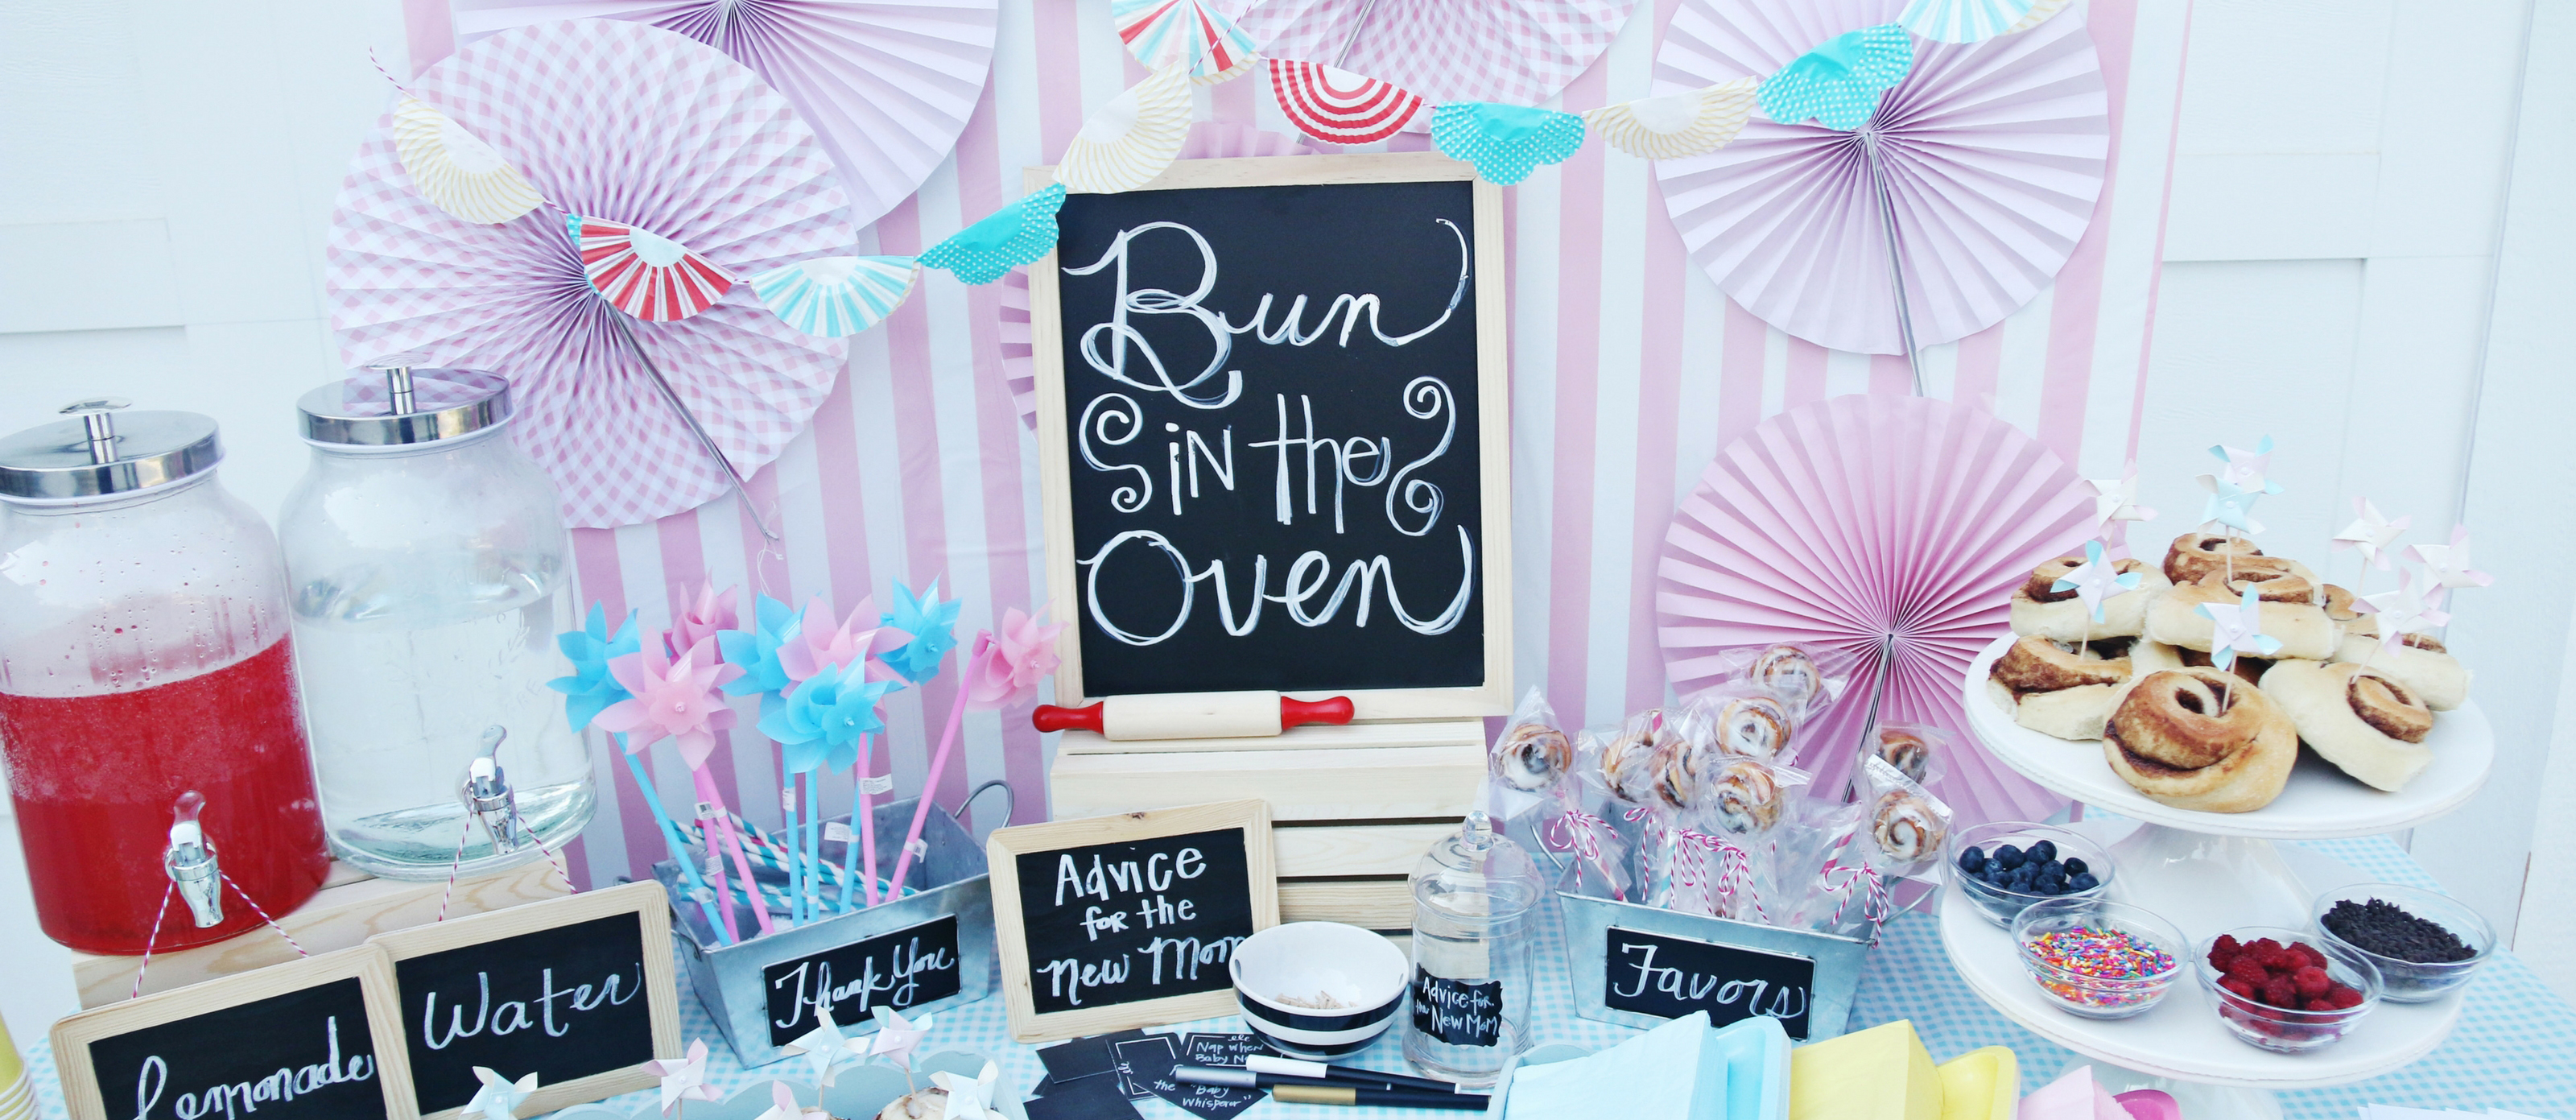 bun in the oven baby shower theme